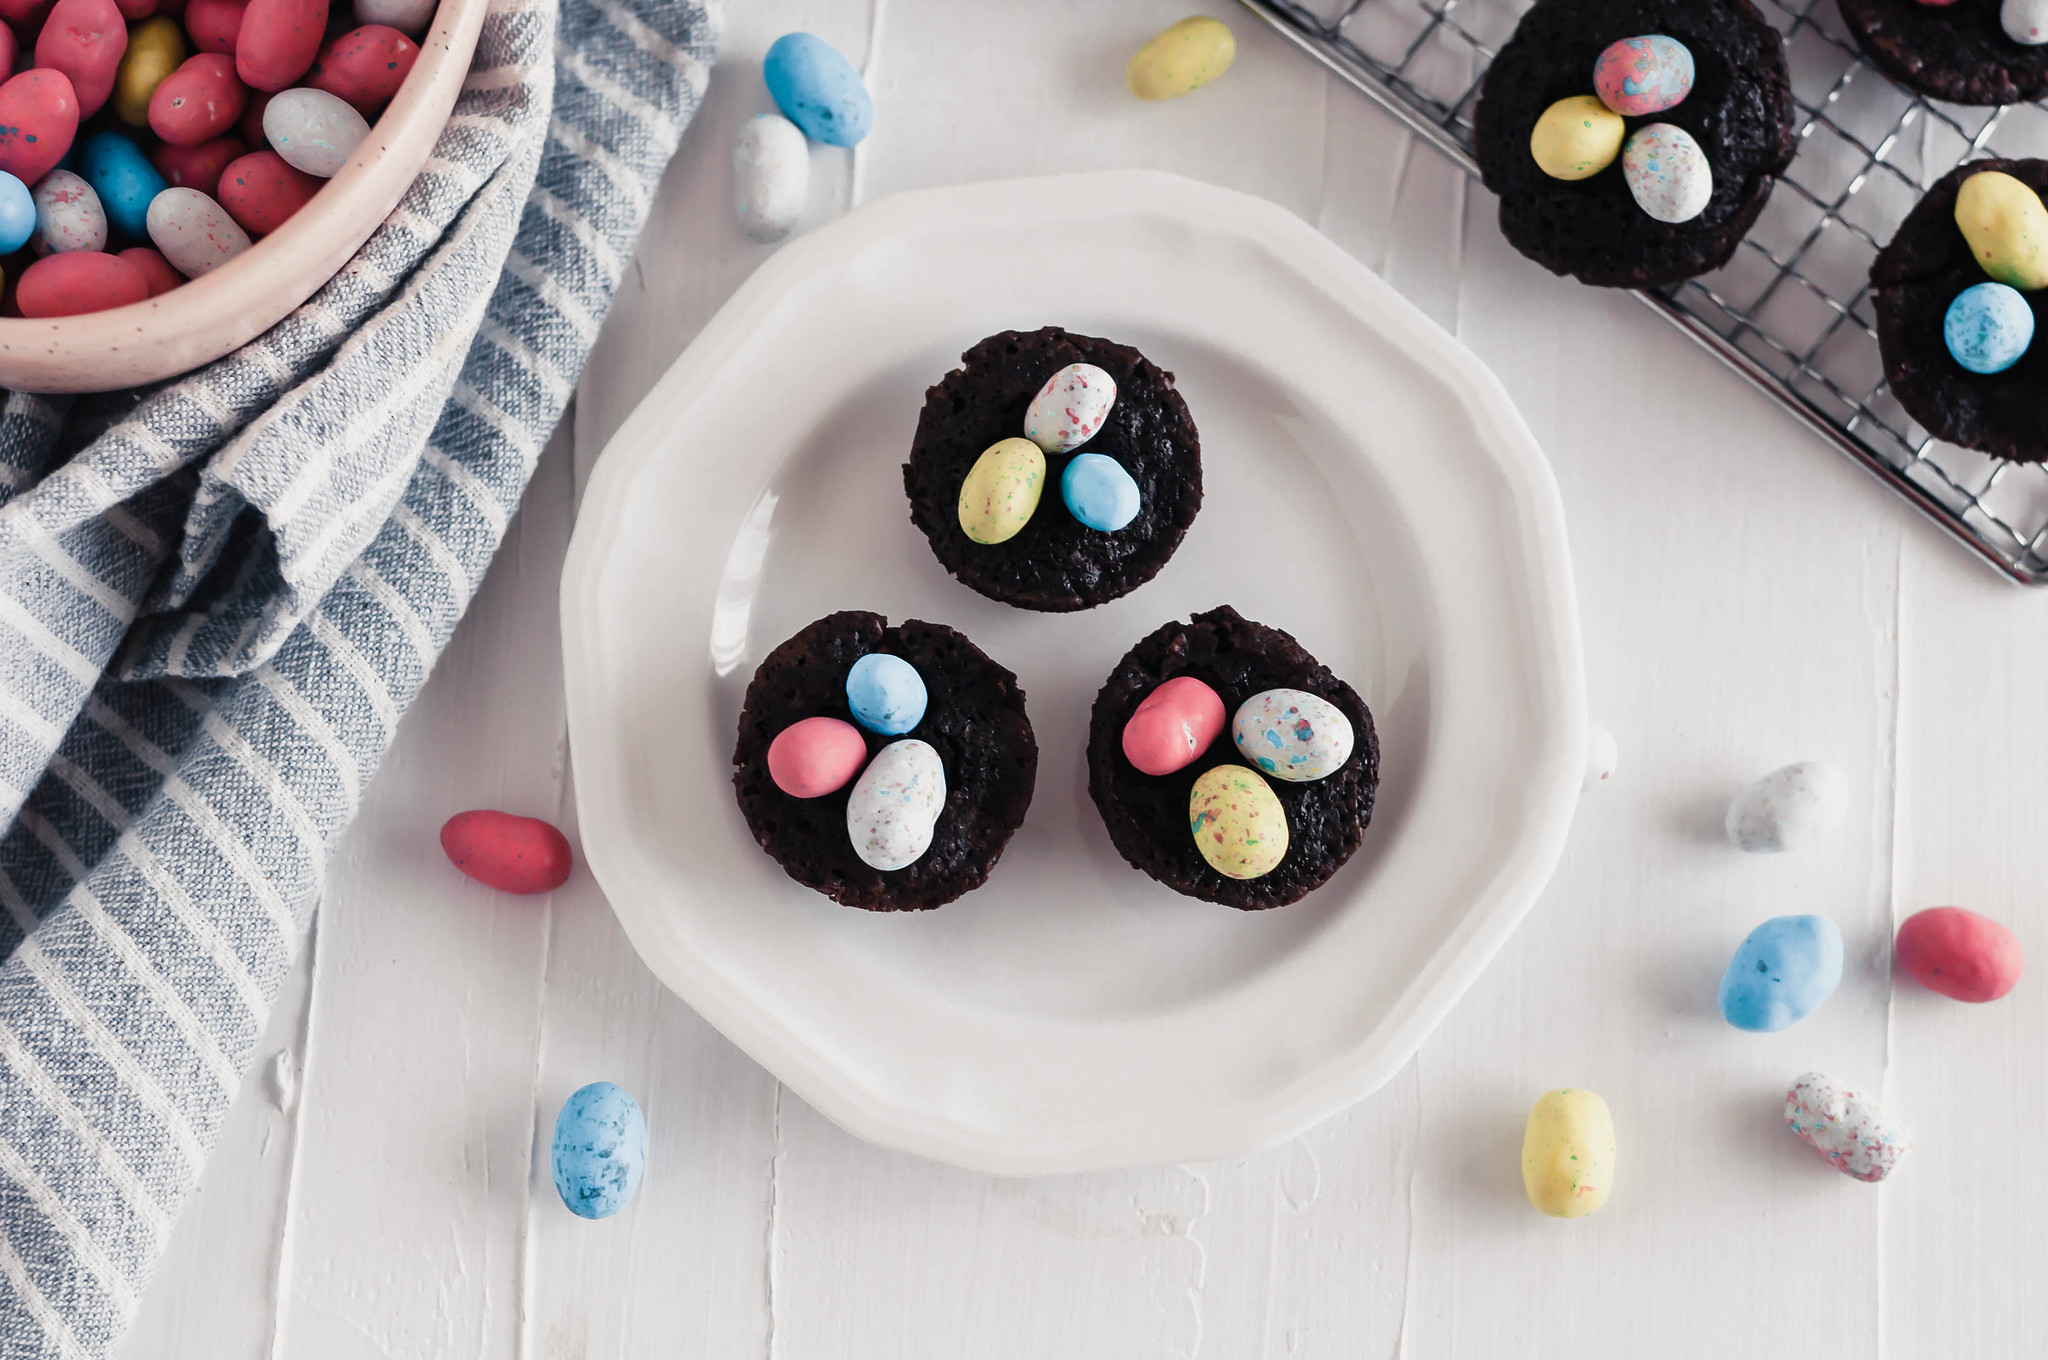 These cute little Brownie Nests are SO simple to make and super festive. Get the kids in the kitchen to help make this simple Easter dessert.